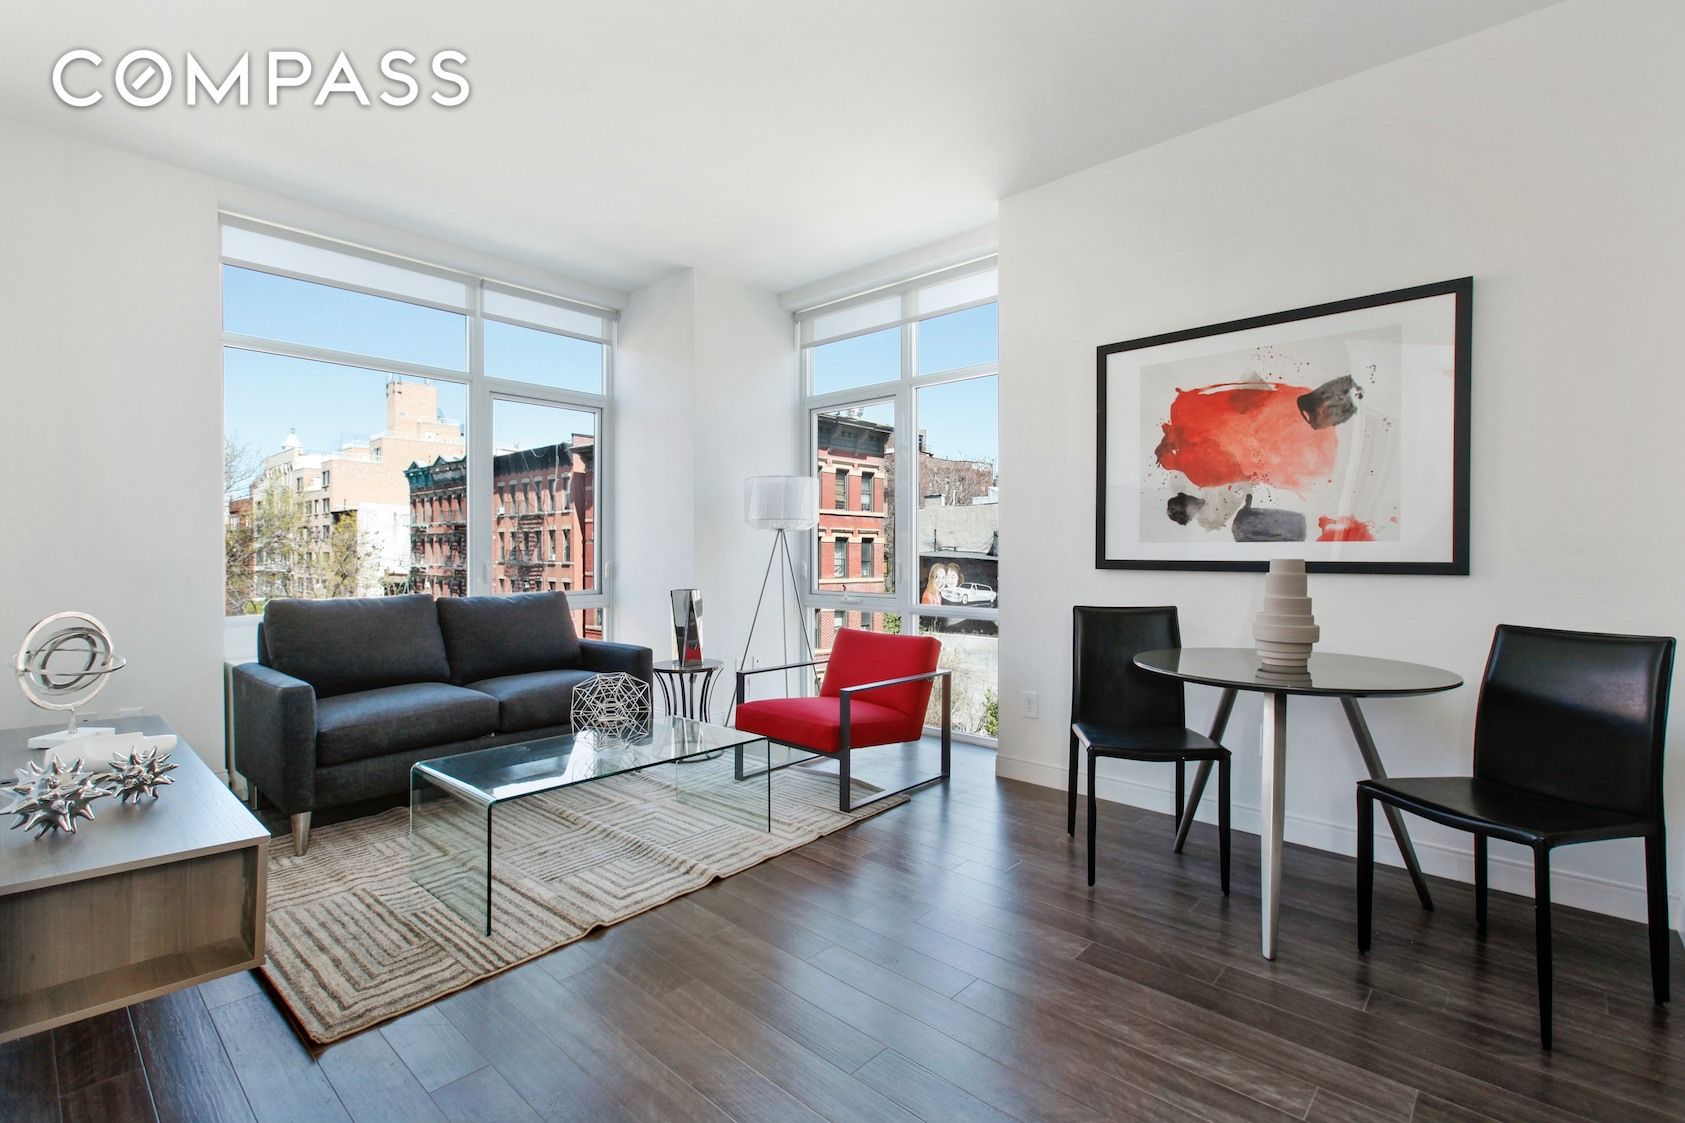 185 Ave B 5F, East Village, Downtown, NYC - 1 Bedrooms  

3 Rooms - 